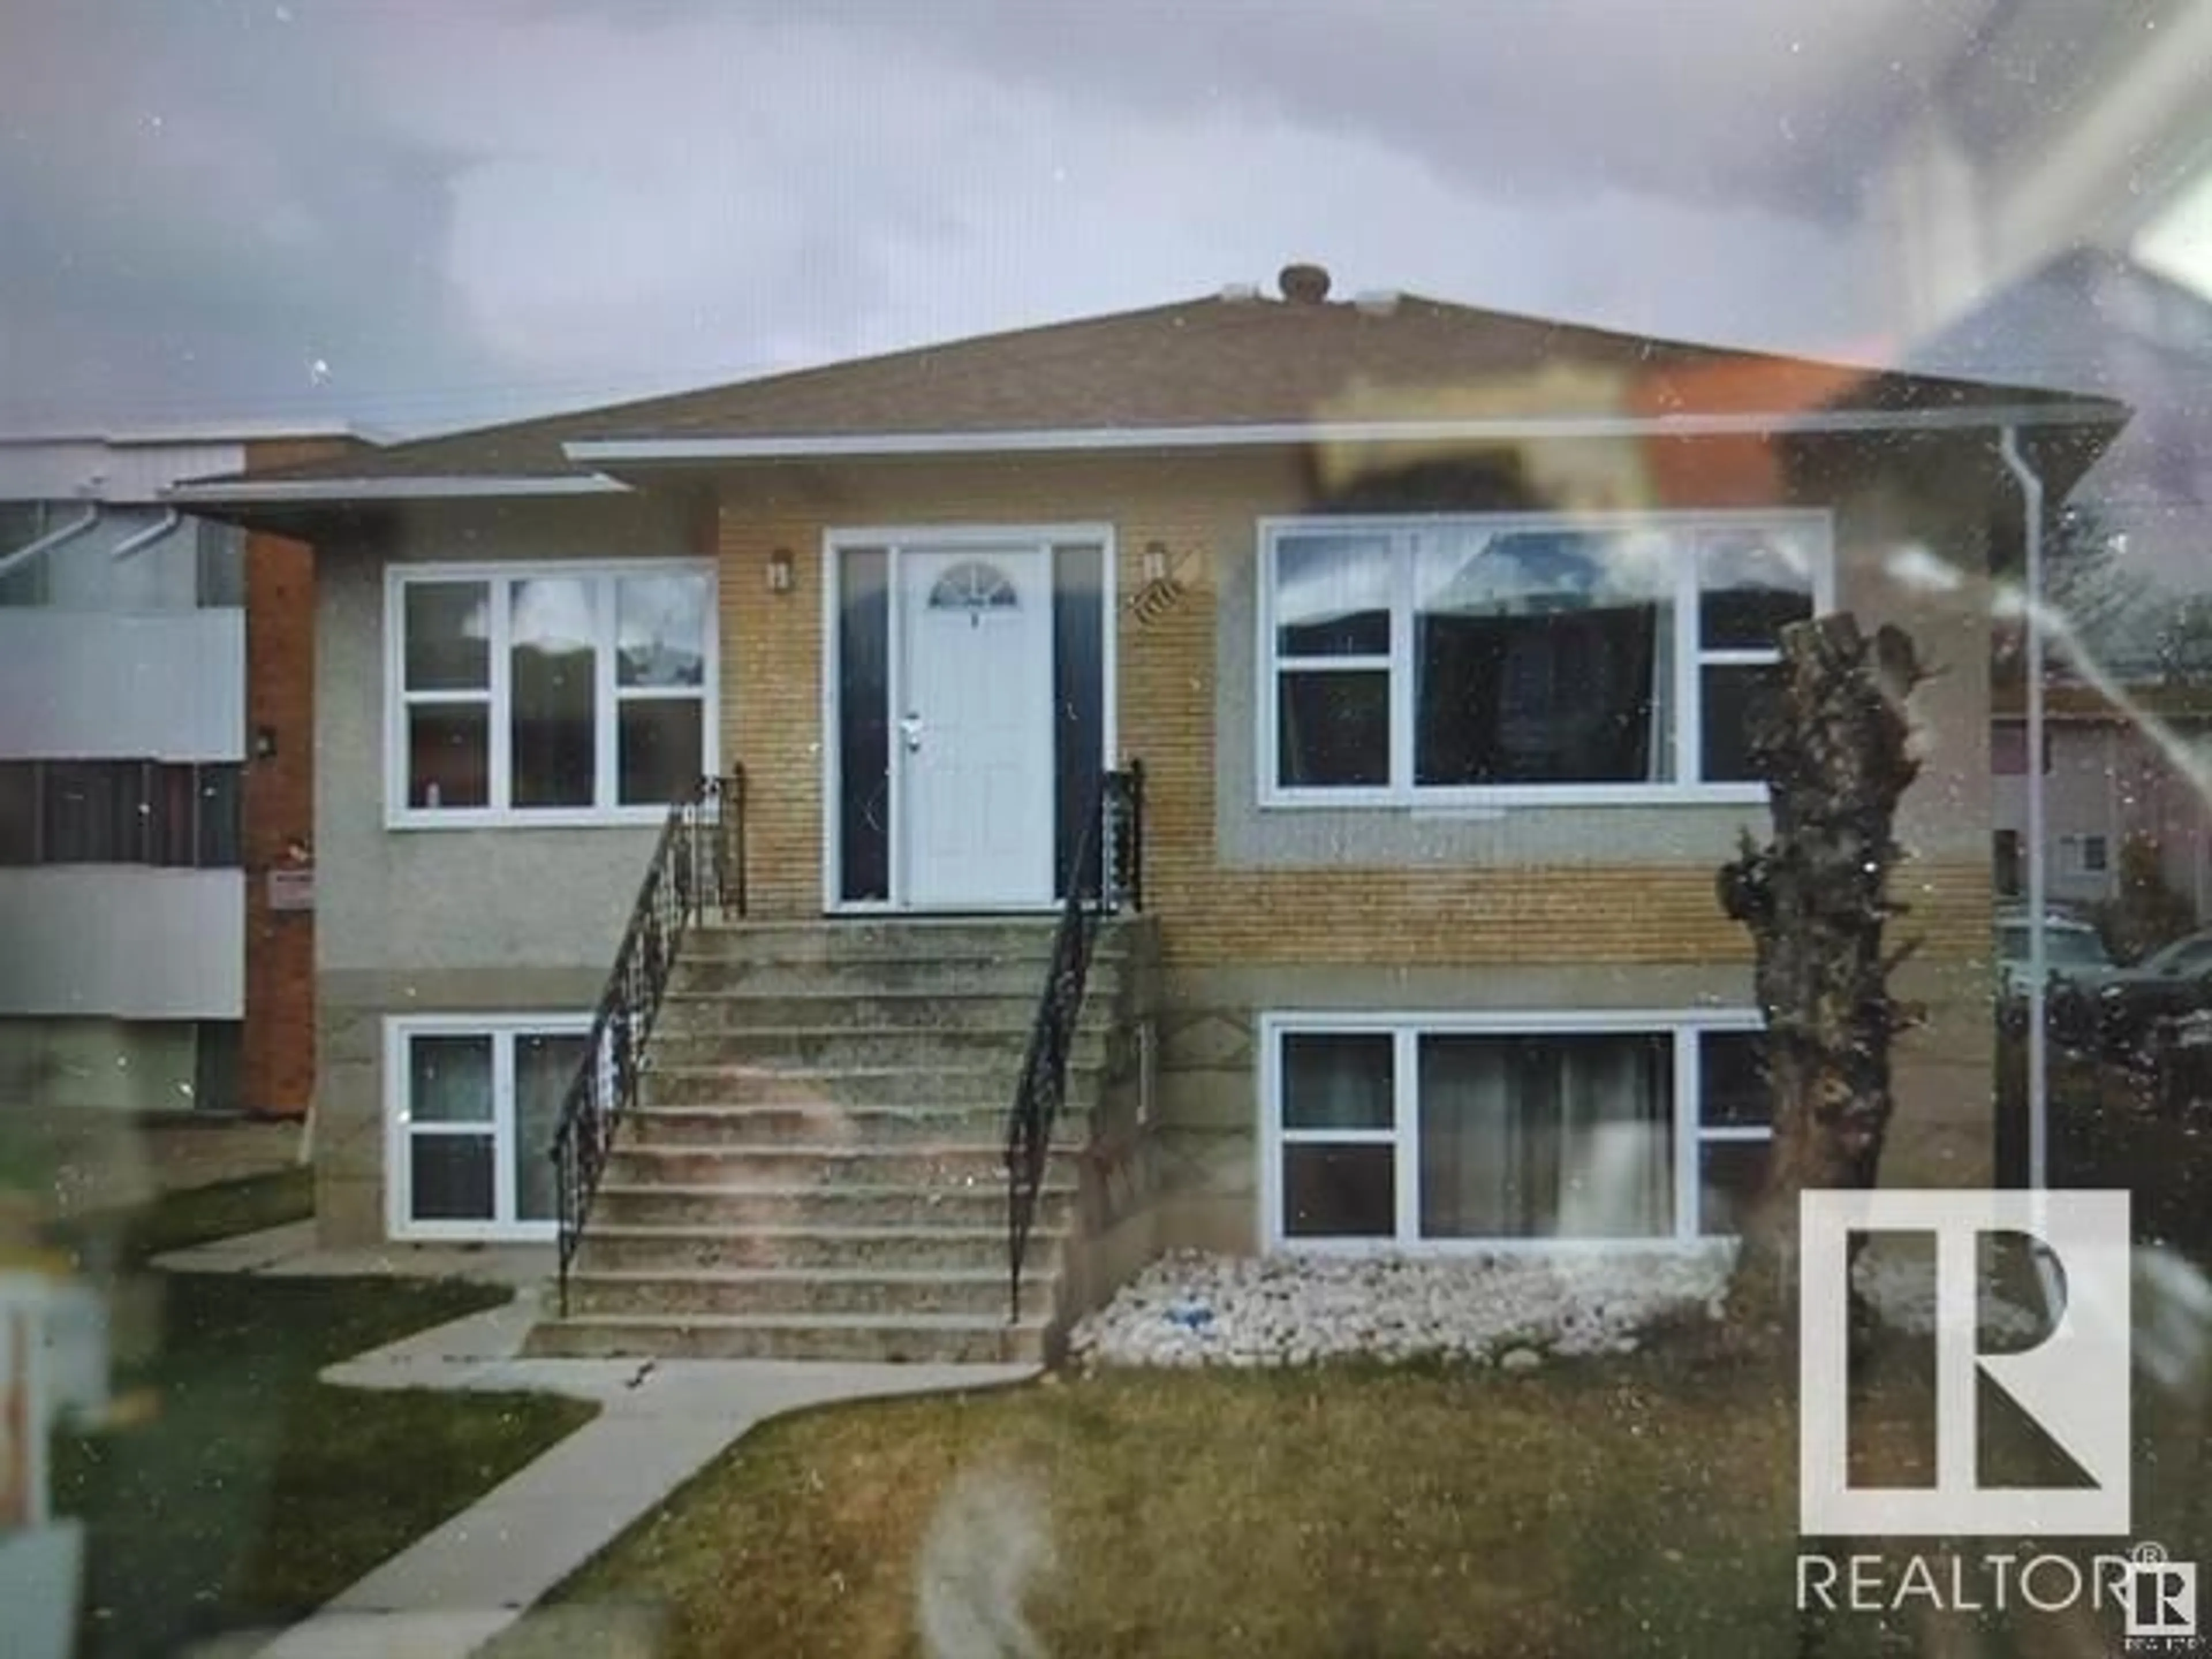 Frontside or backside of a home for 11716 124 ST NW, Edmonton Alberta T5M0K9